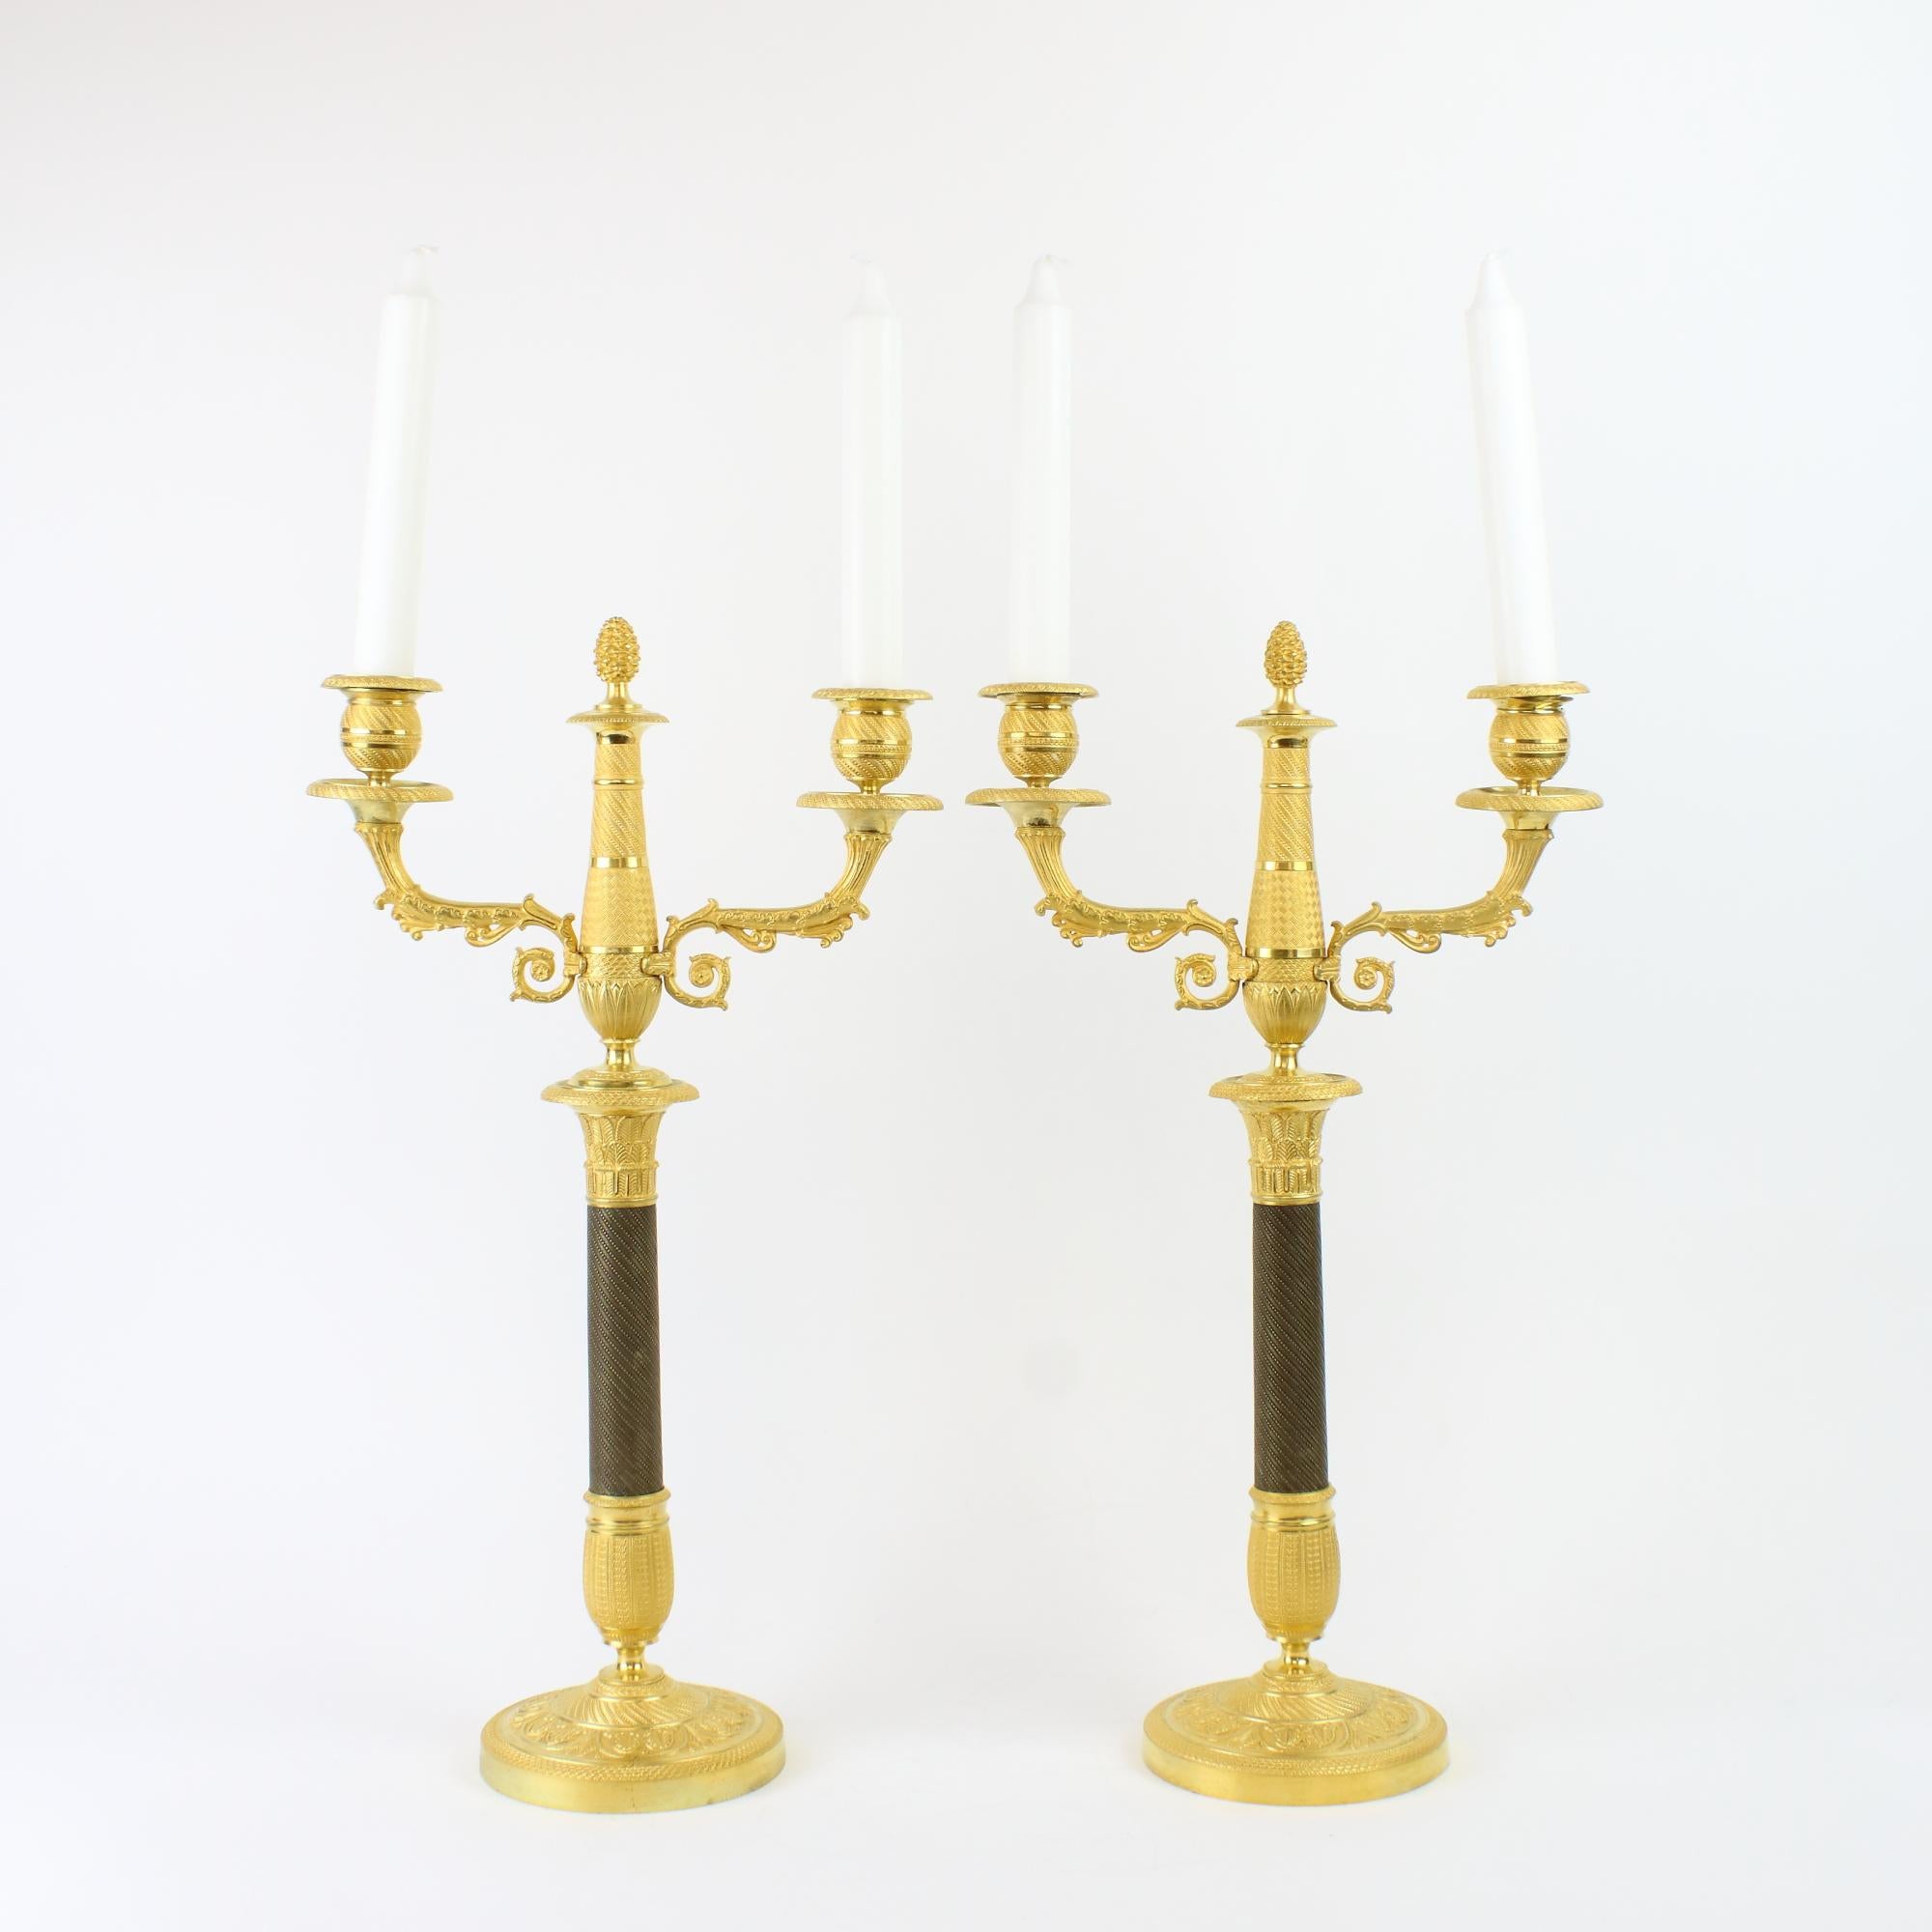 Pair of French Empire Neoclassical One-/Two-Light Patinated and Gilt Bronze Candelabra

A tapering, partially patinated pearl frieze bronze stem on an ovoid gilt bronze guilloche socle standing on a circular plinth decorated with foliage and